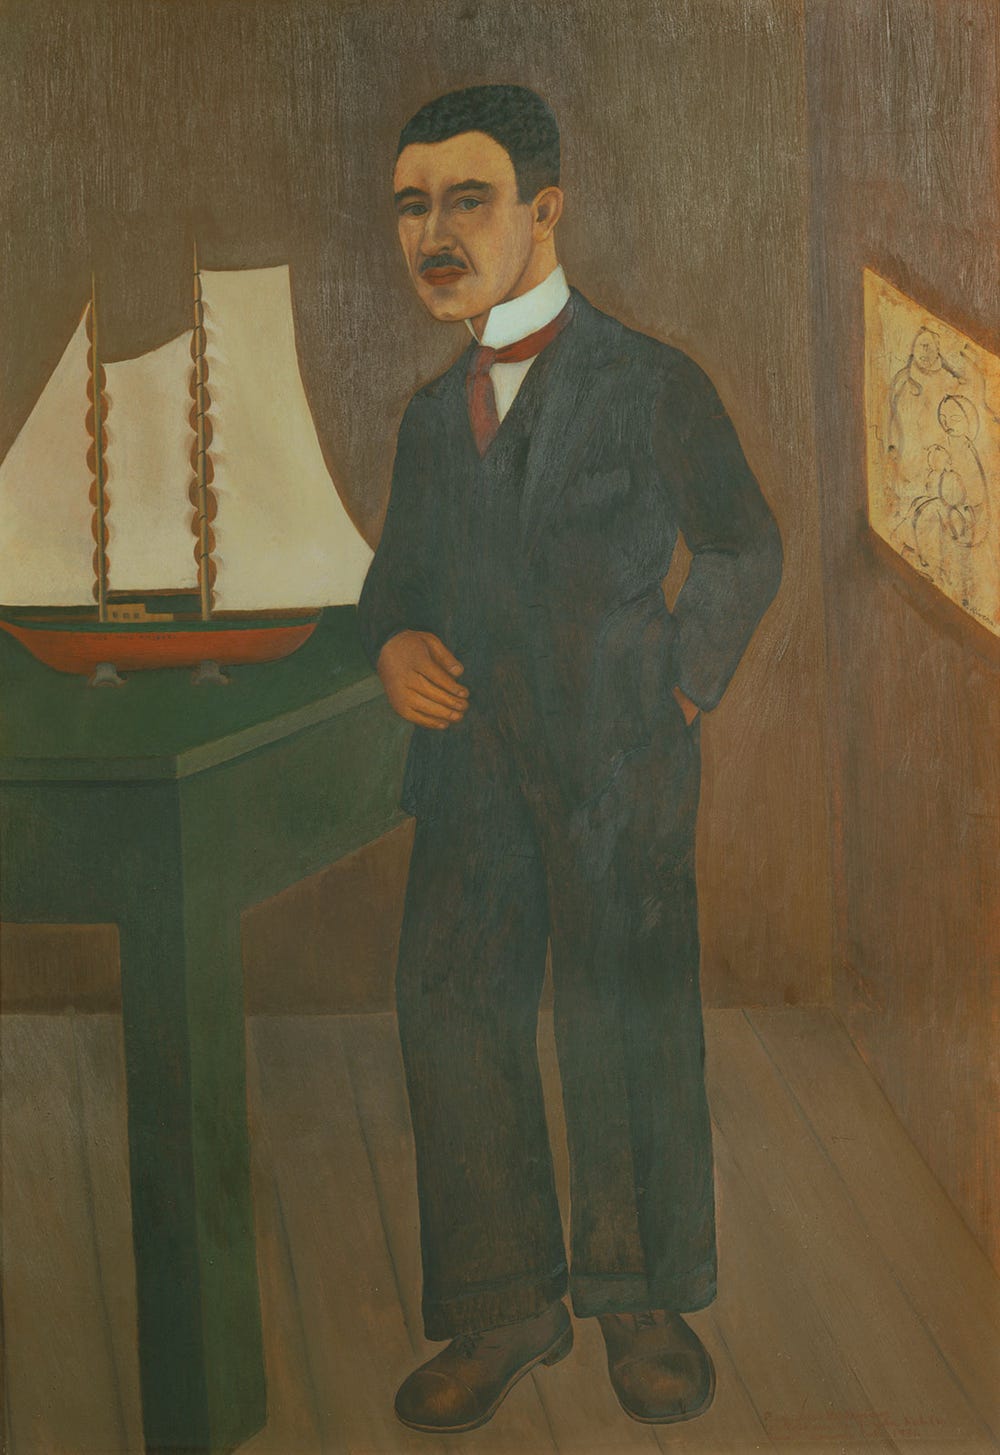 portrait of a man with dark hair in a suit, with a model sailboat and painting in the background